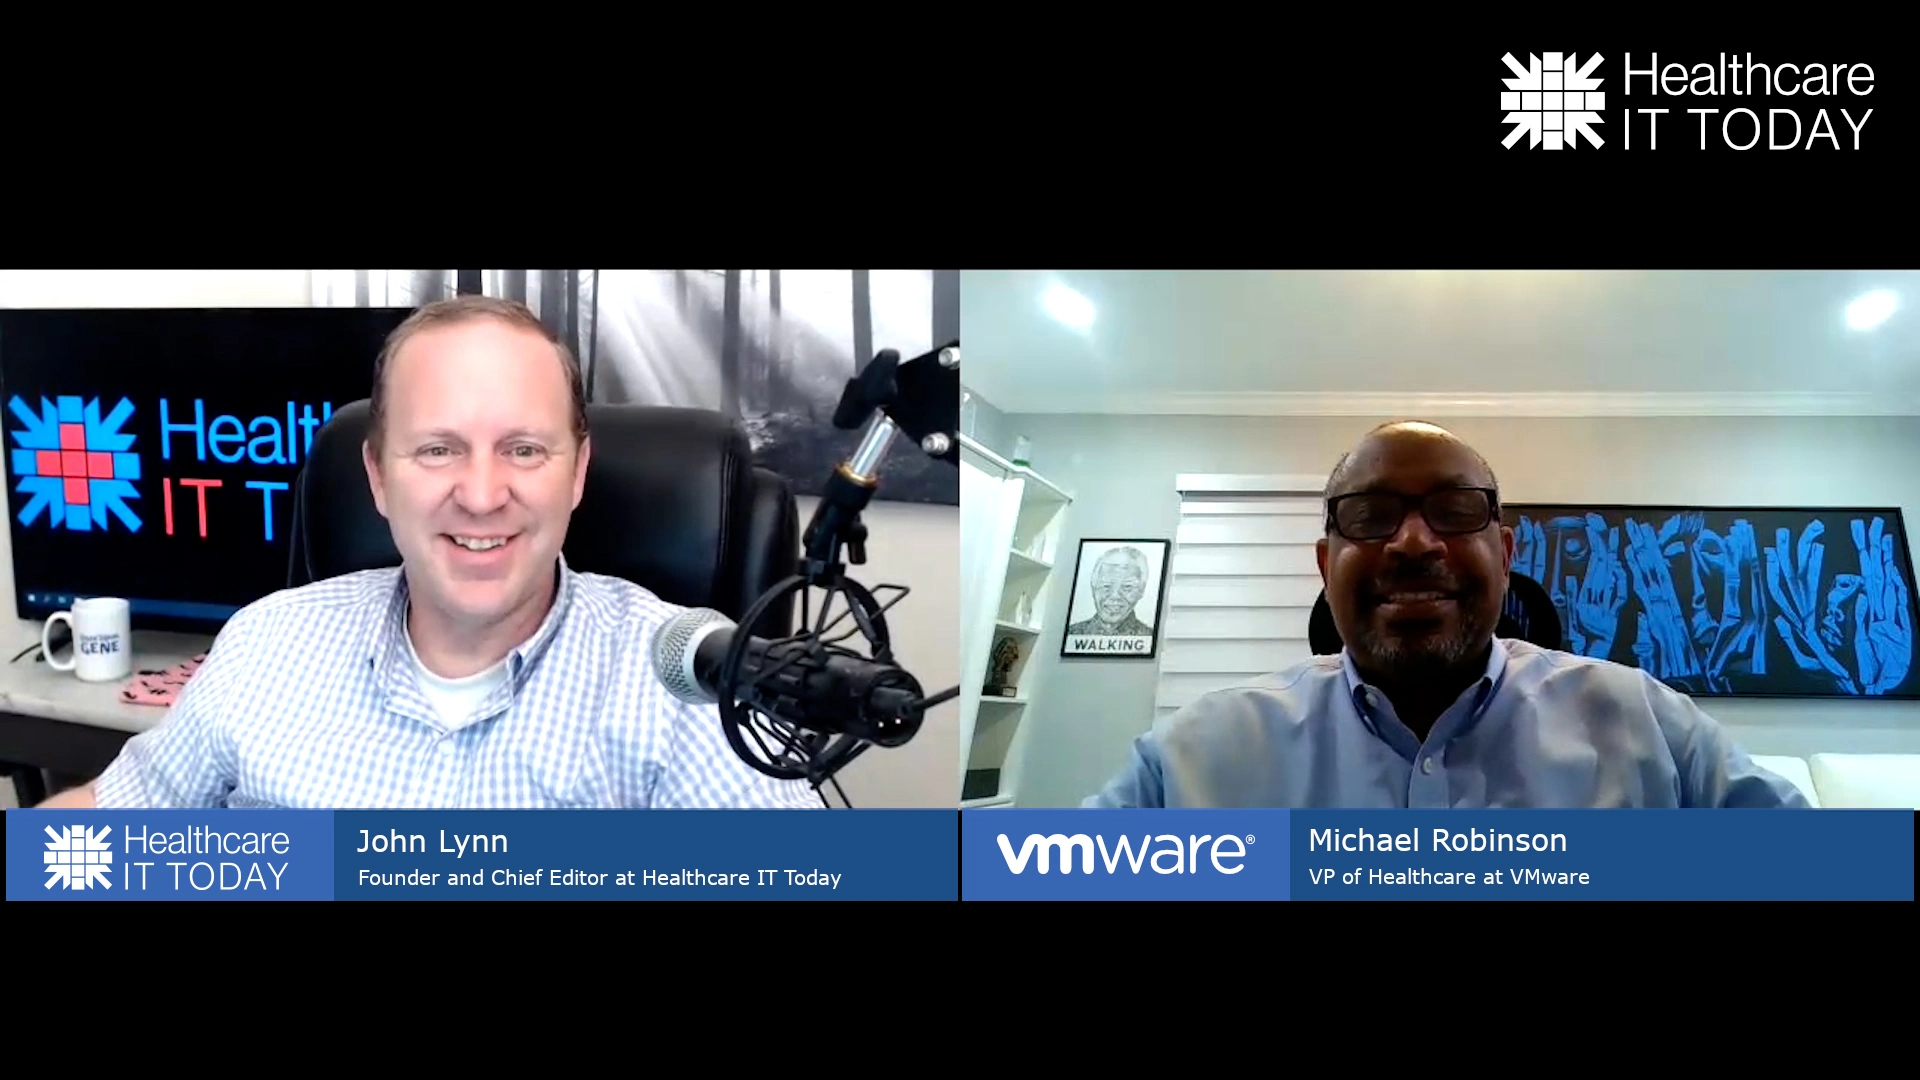 Better Servicing Patients and Staff at Scale with VMware